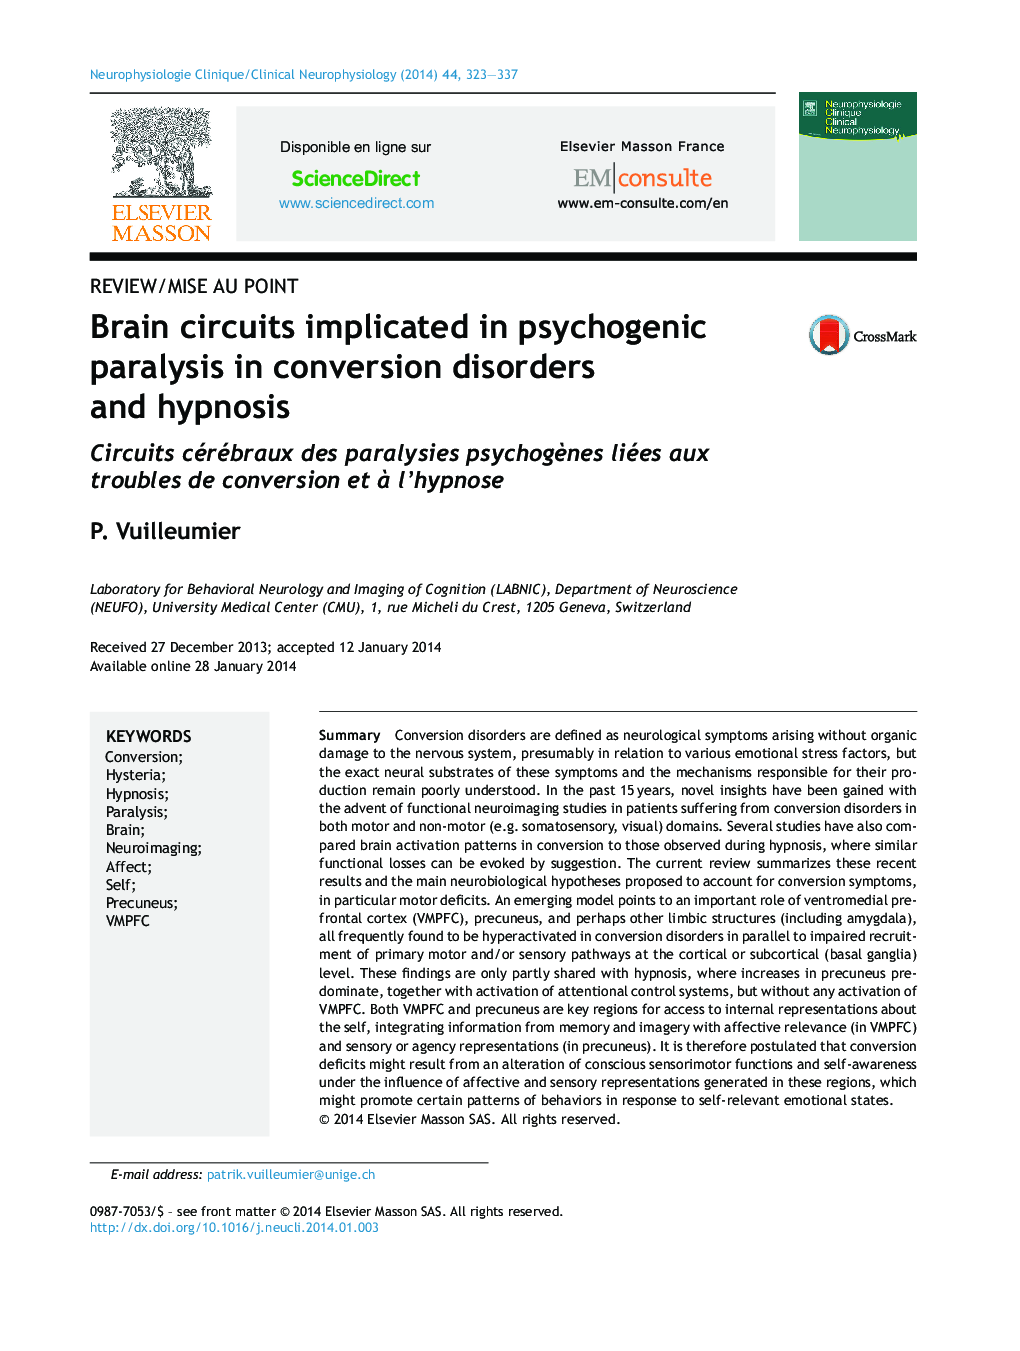 Brain circuits implicated in psychogenic paralysis in conversion disorders and hypnosis